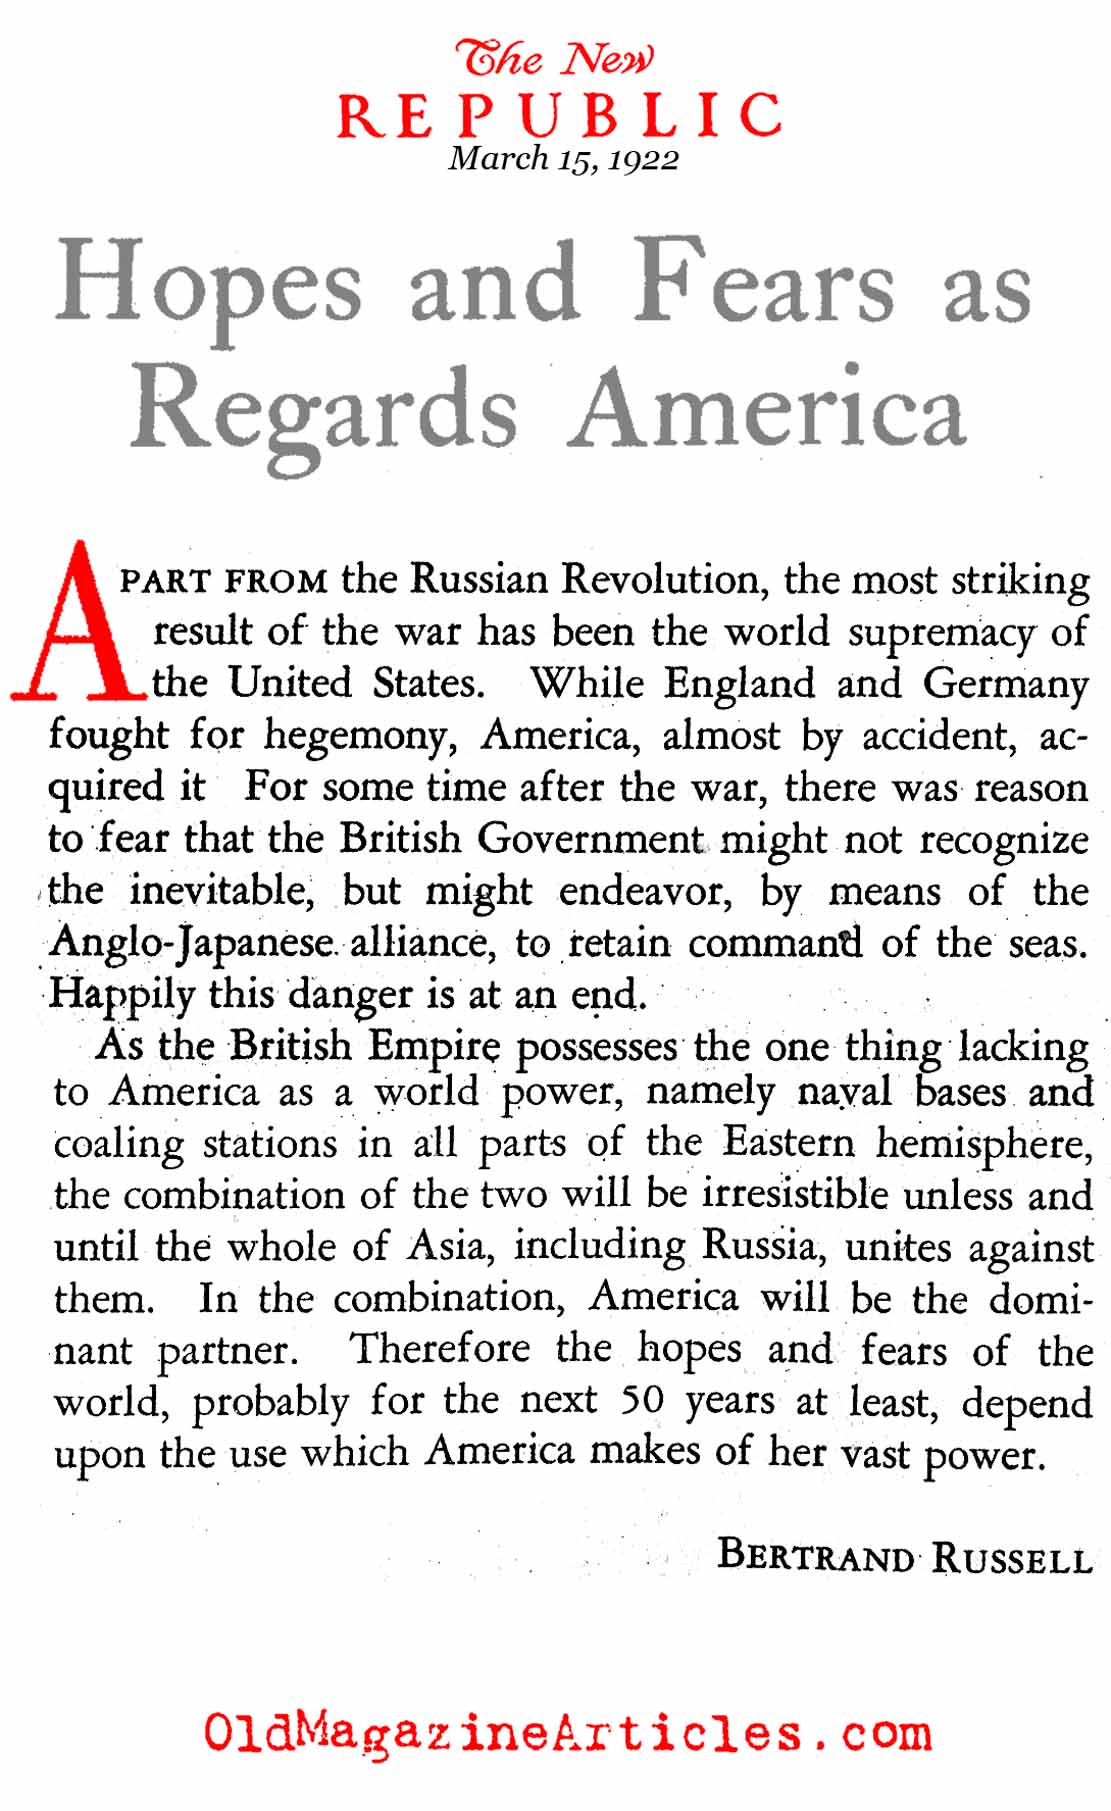 The Emergence of a New World Power (The New Republic, 1922)